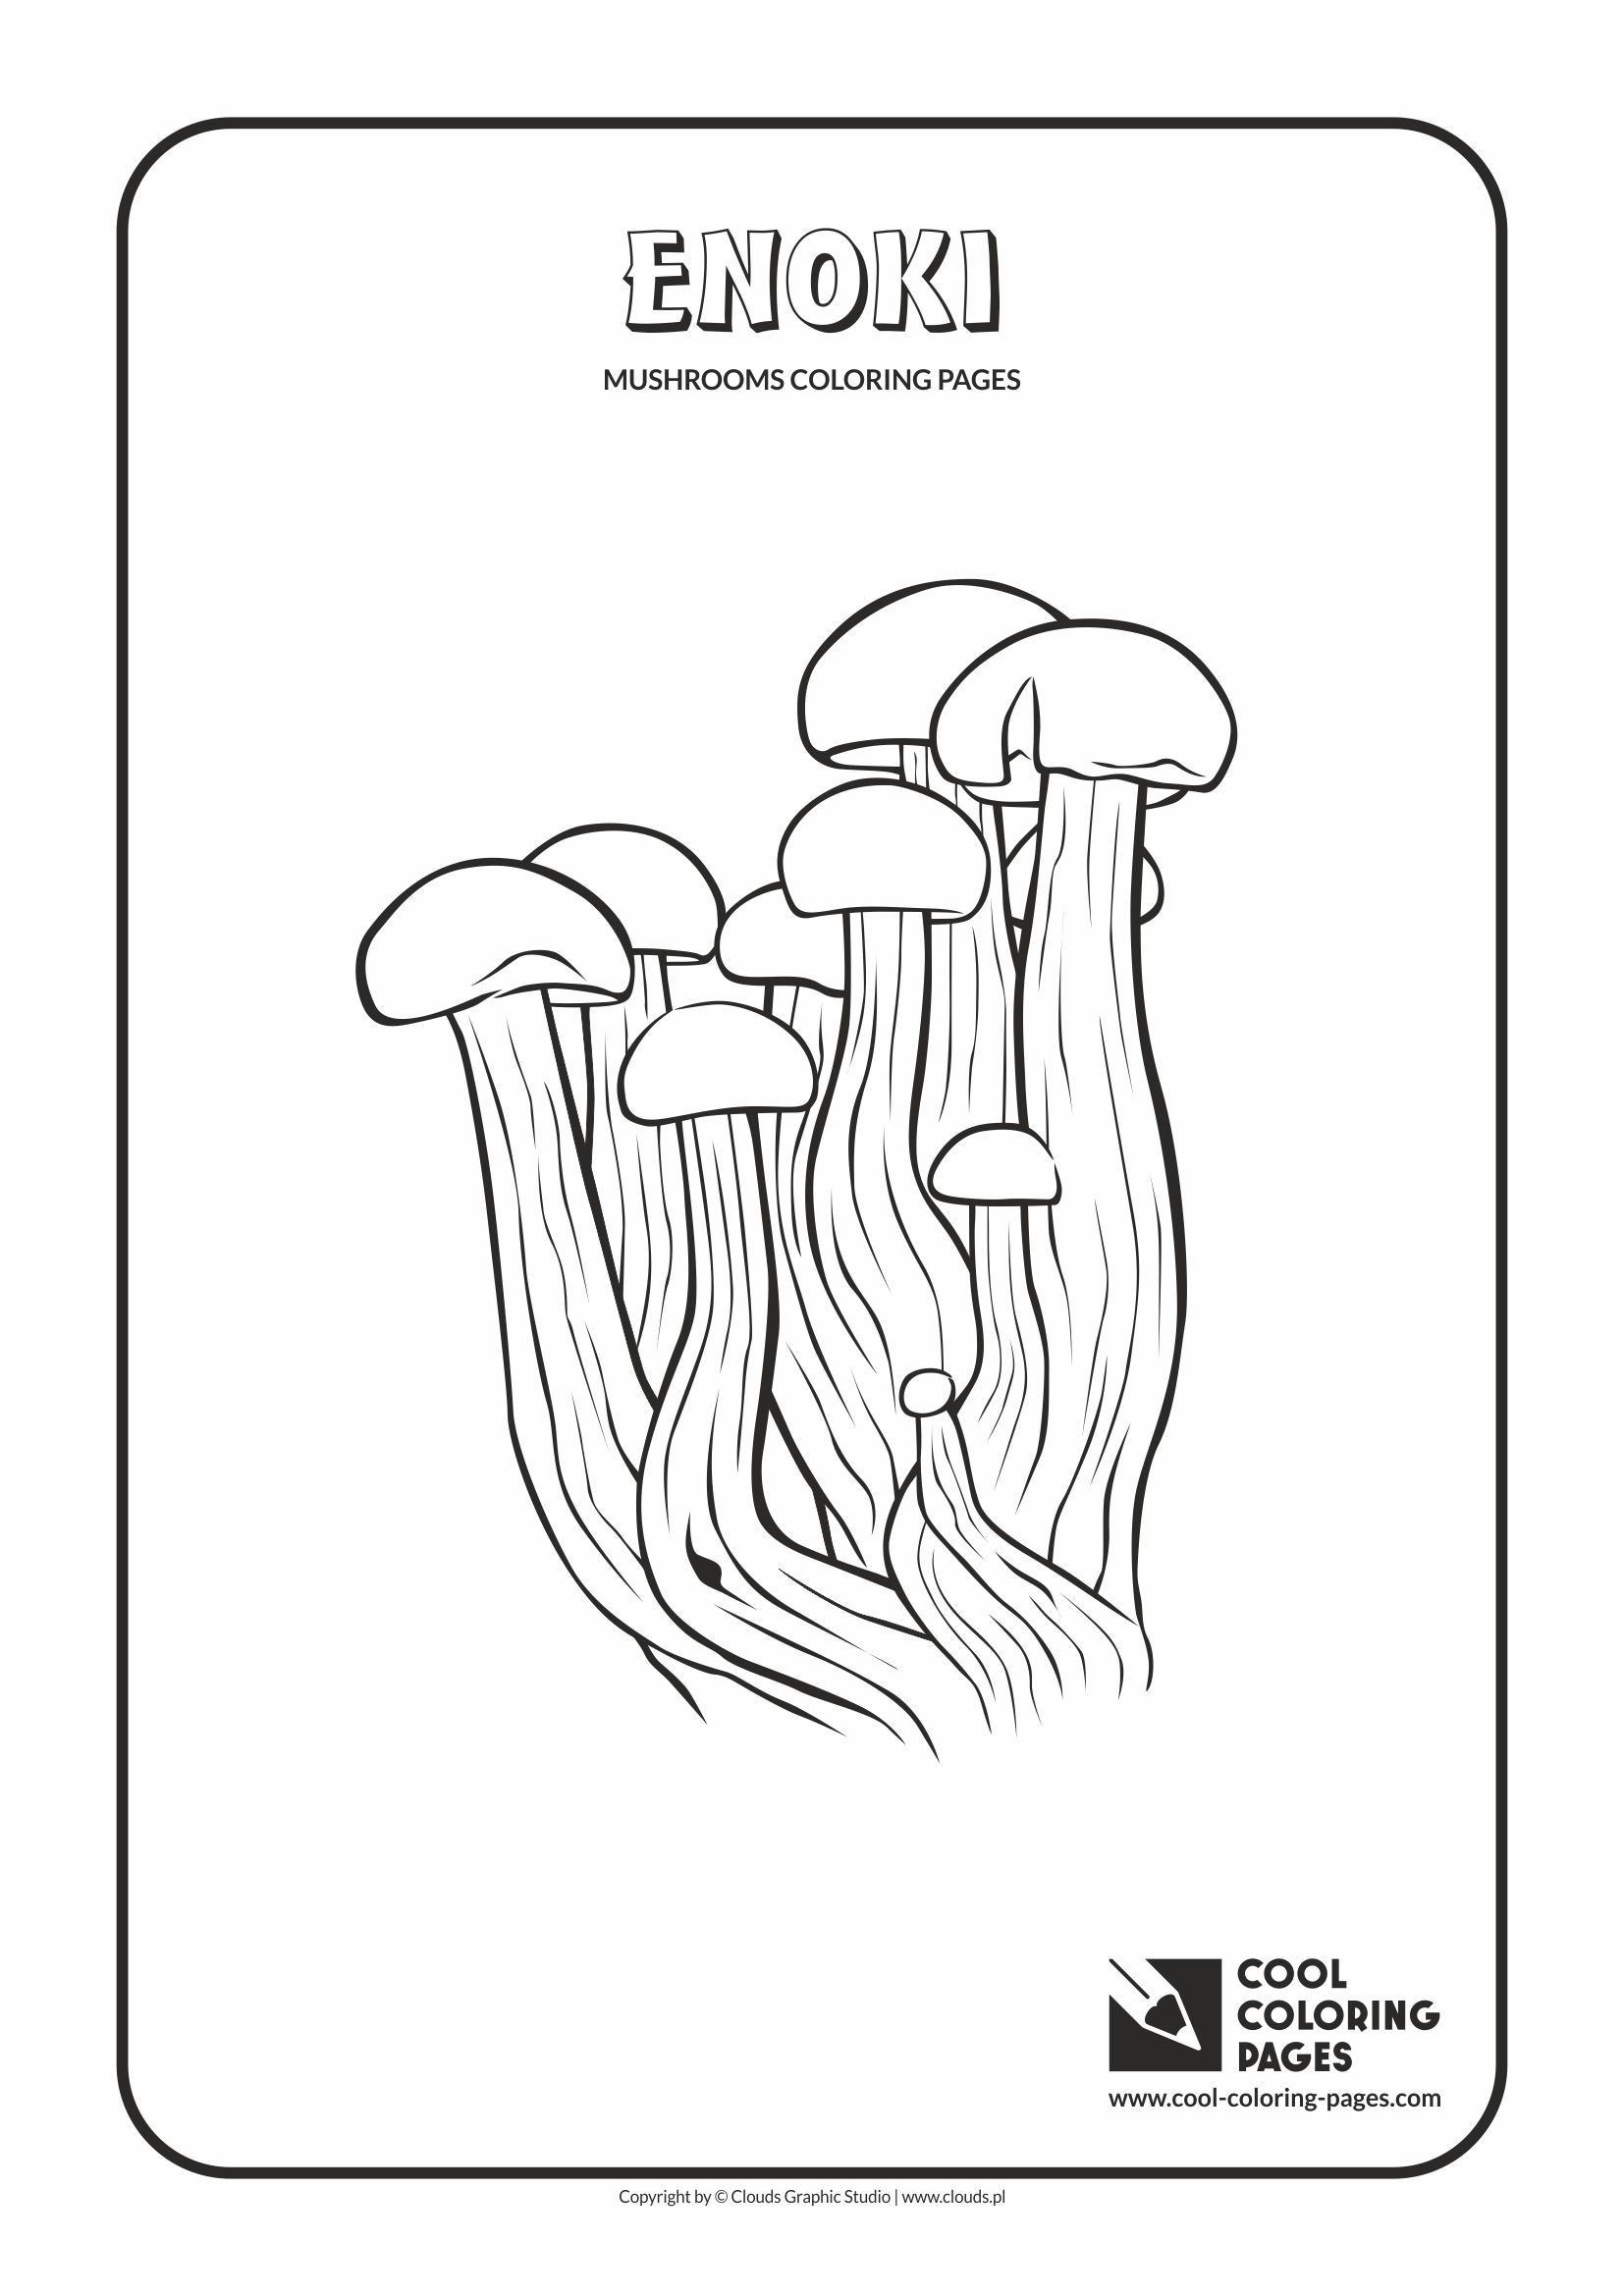 Cool Coloring Pages Mushrooms coloring pages - Cool Coloring Pages